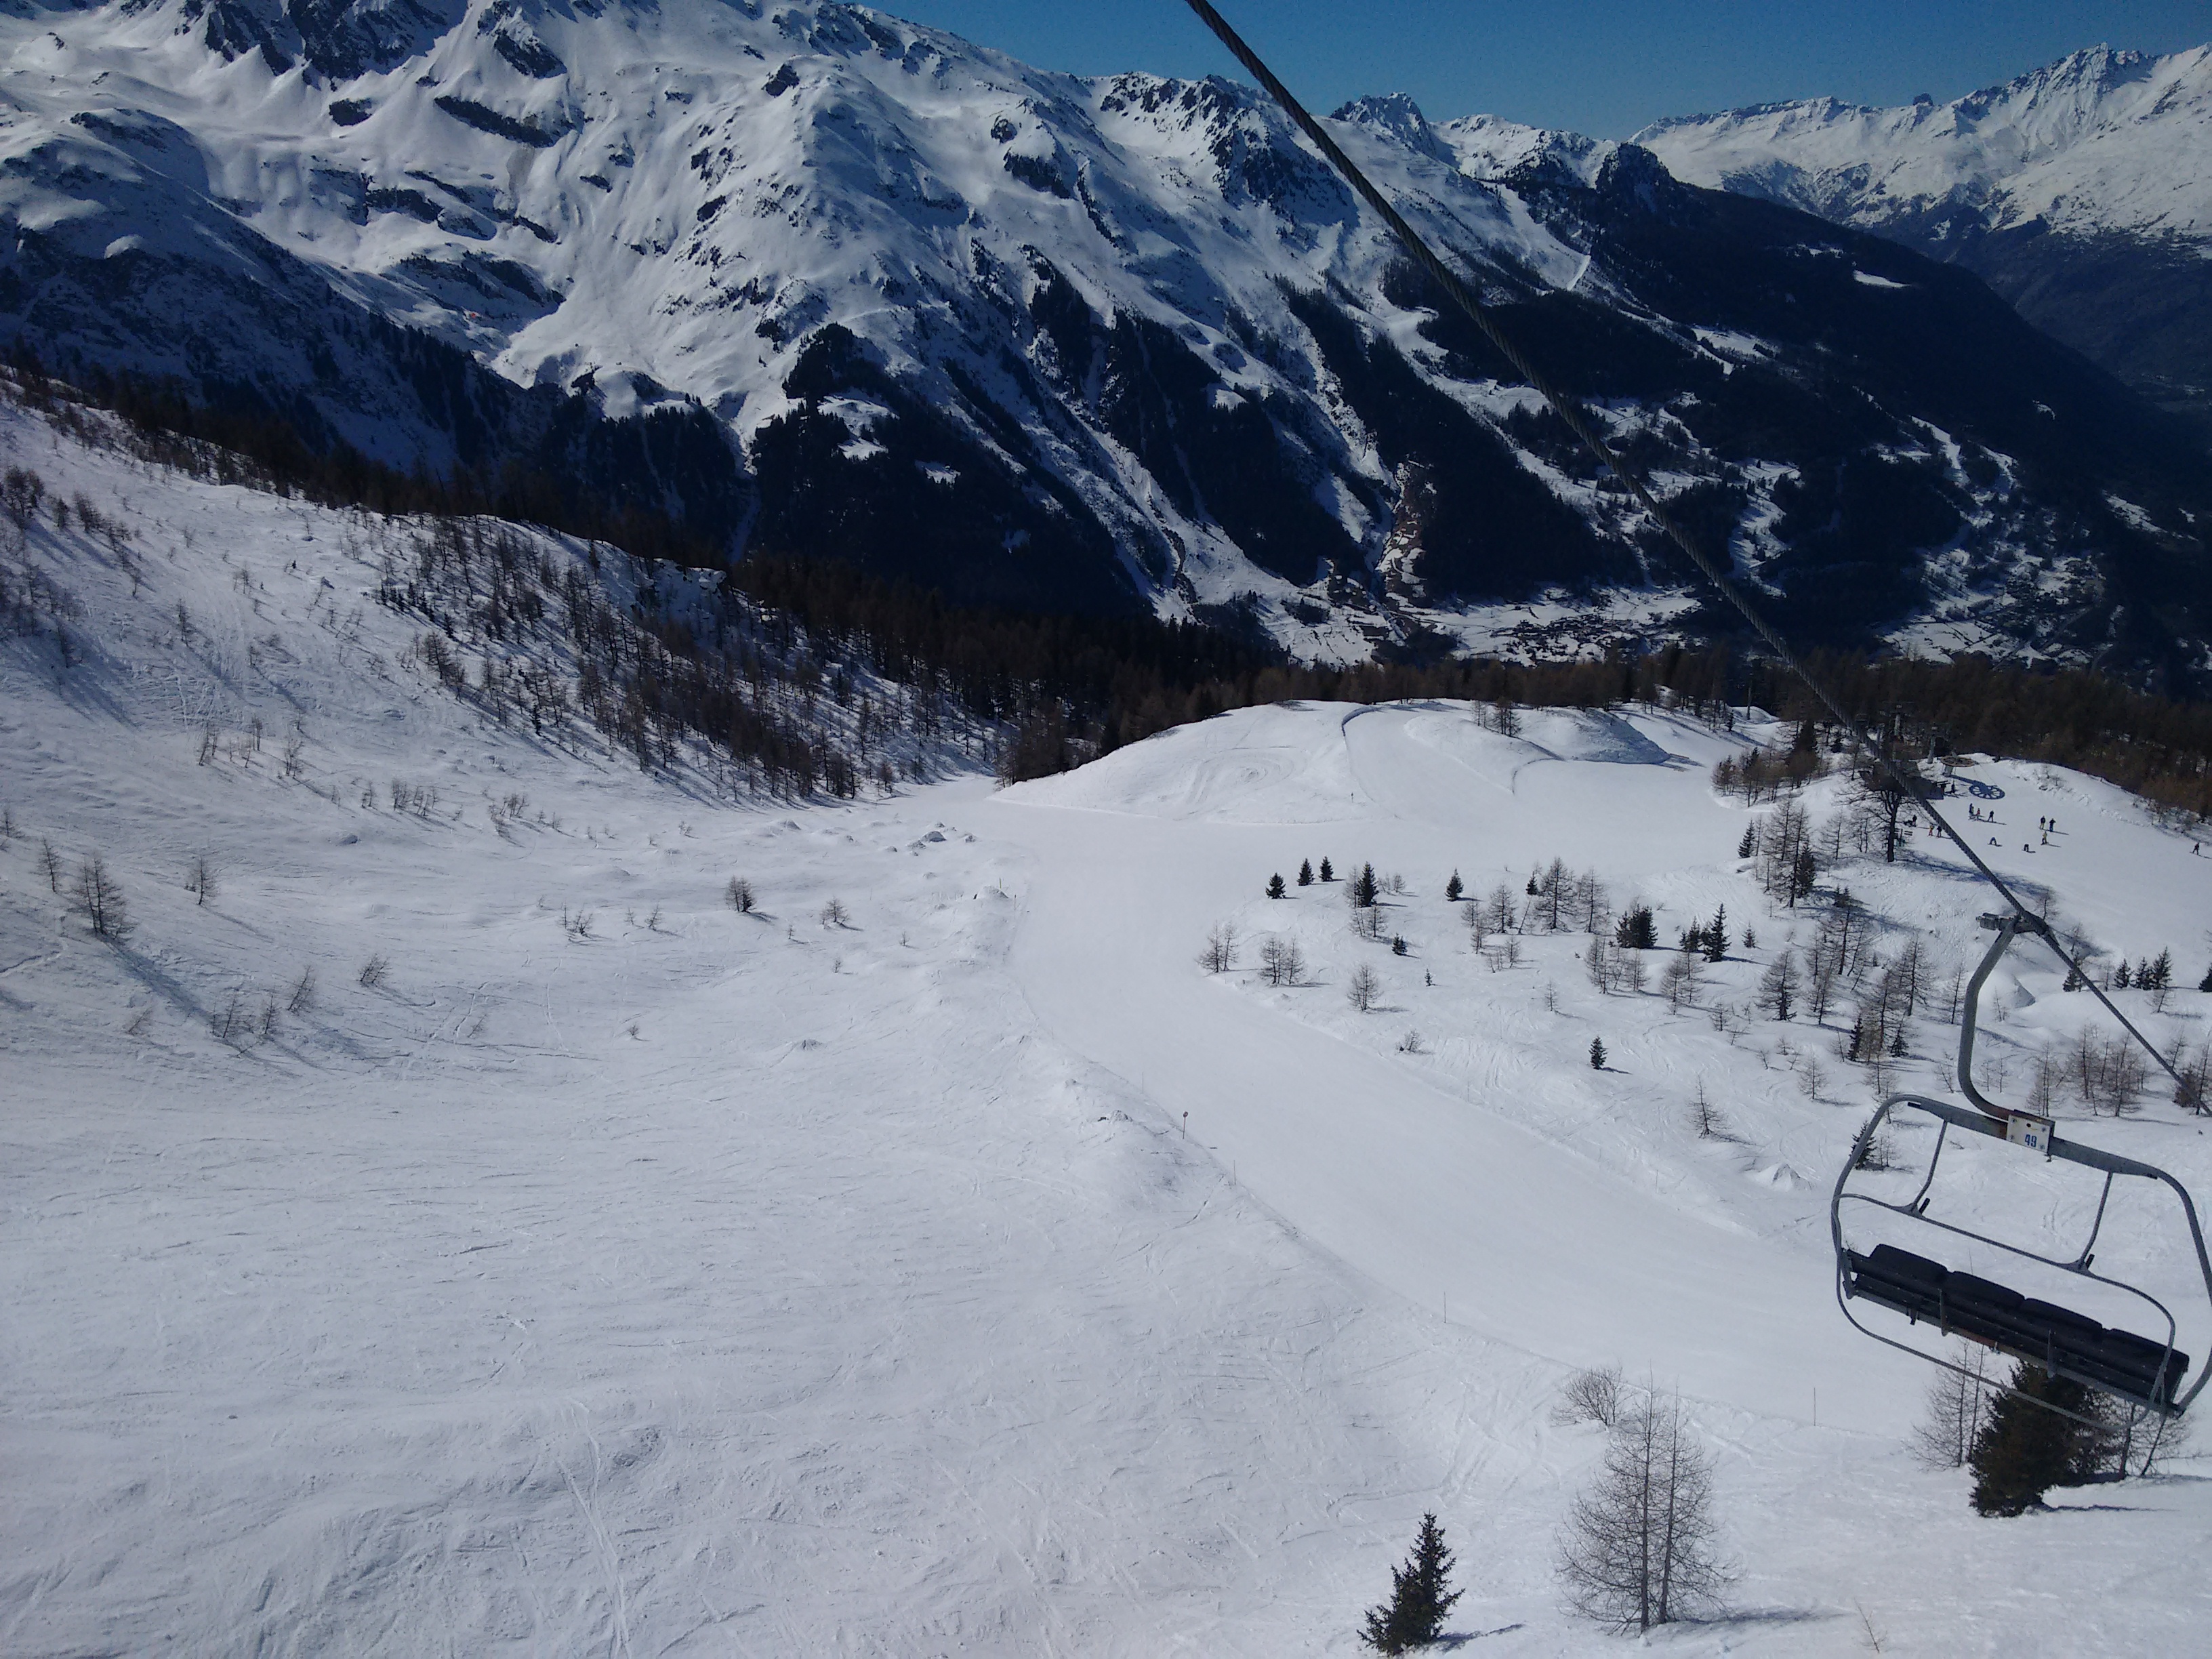 Great for mixed groups. Some great blue runs that all levels can have fun on., Sainte Foy